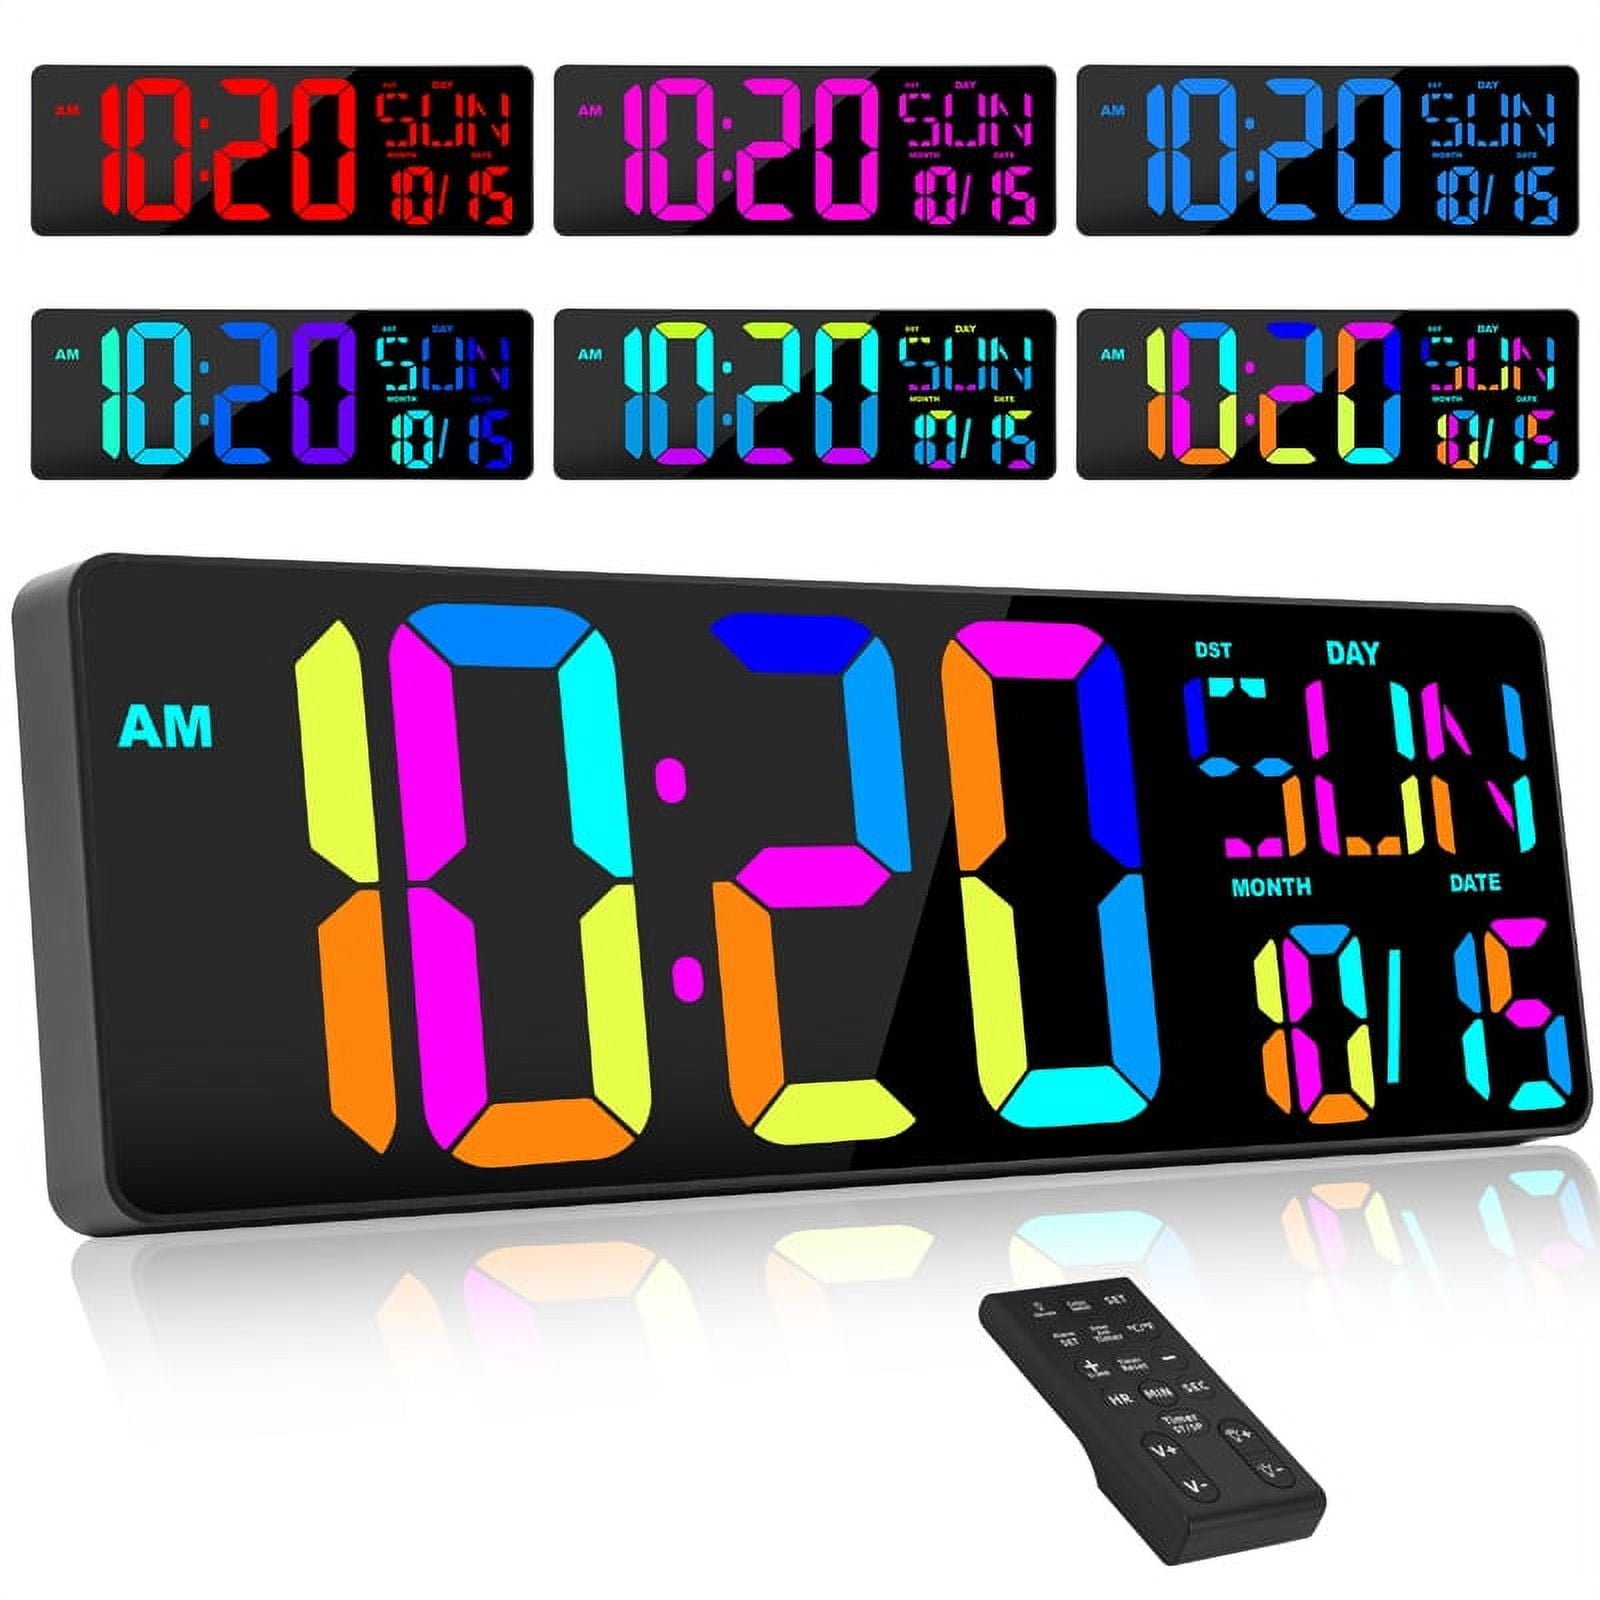 XREXS Large Digital Wall Clock with Remote Control, 17 Inch LED